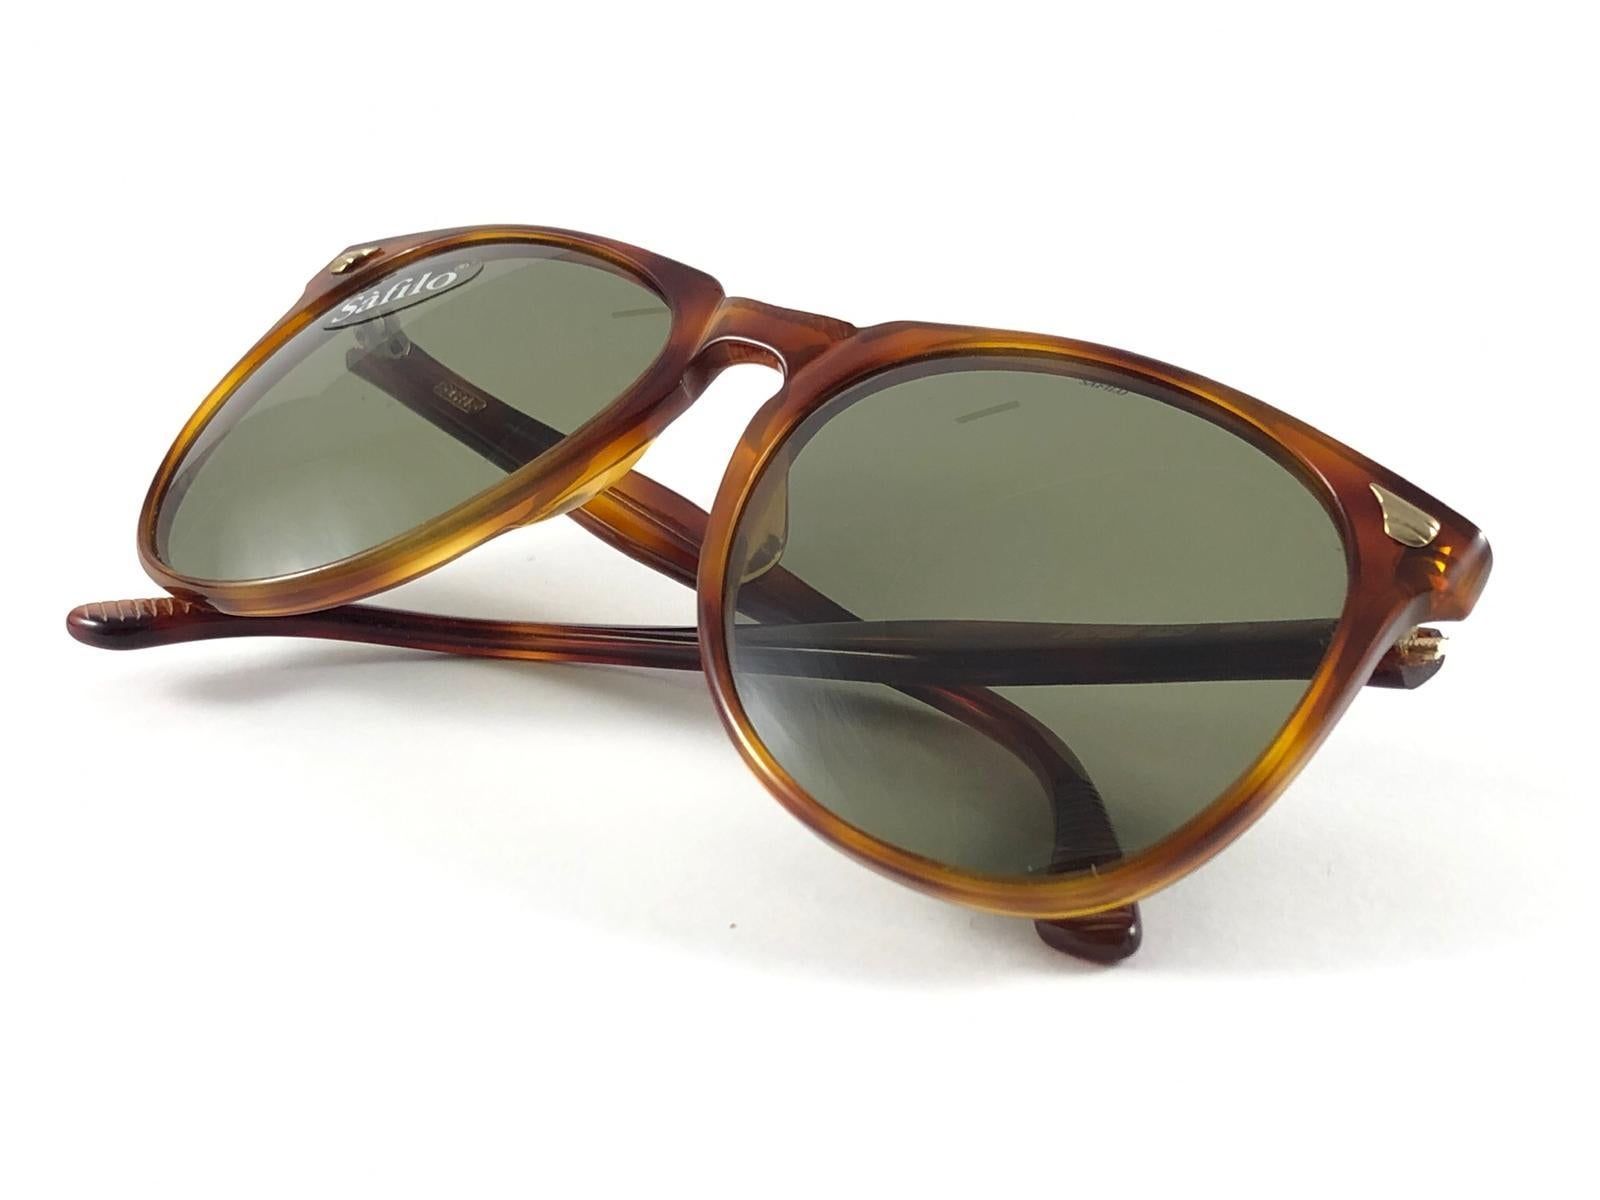 New Vintage Safilo Team 429 Tortoise Frame Made in Italy 1980's Sunglasses For Sale 4